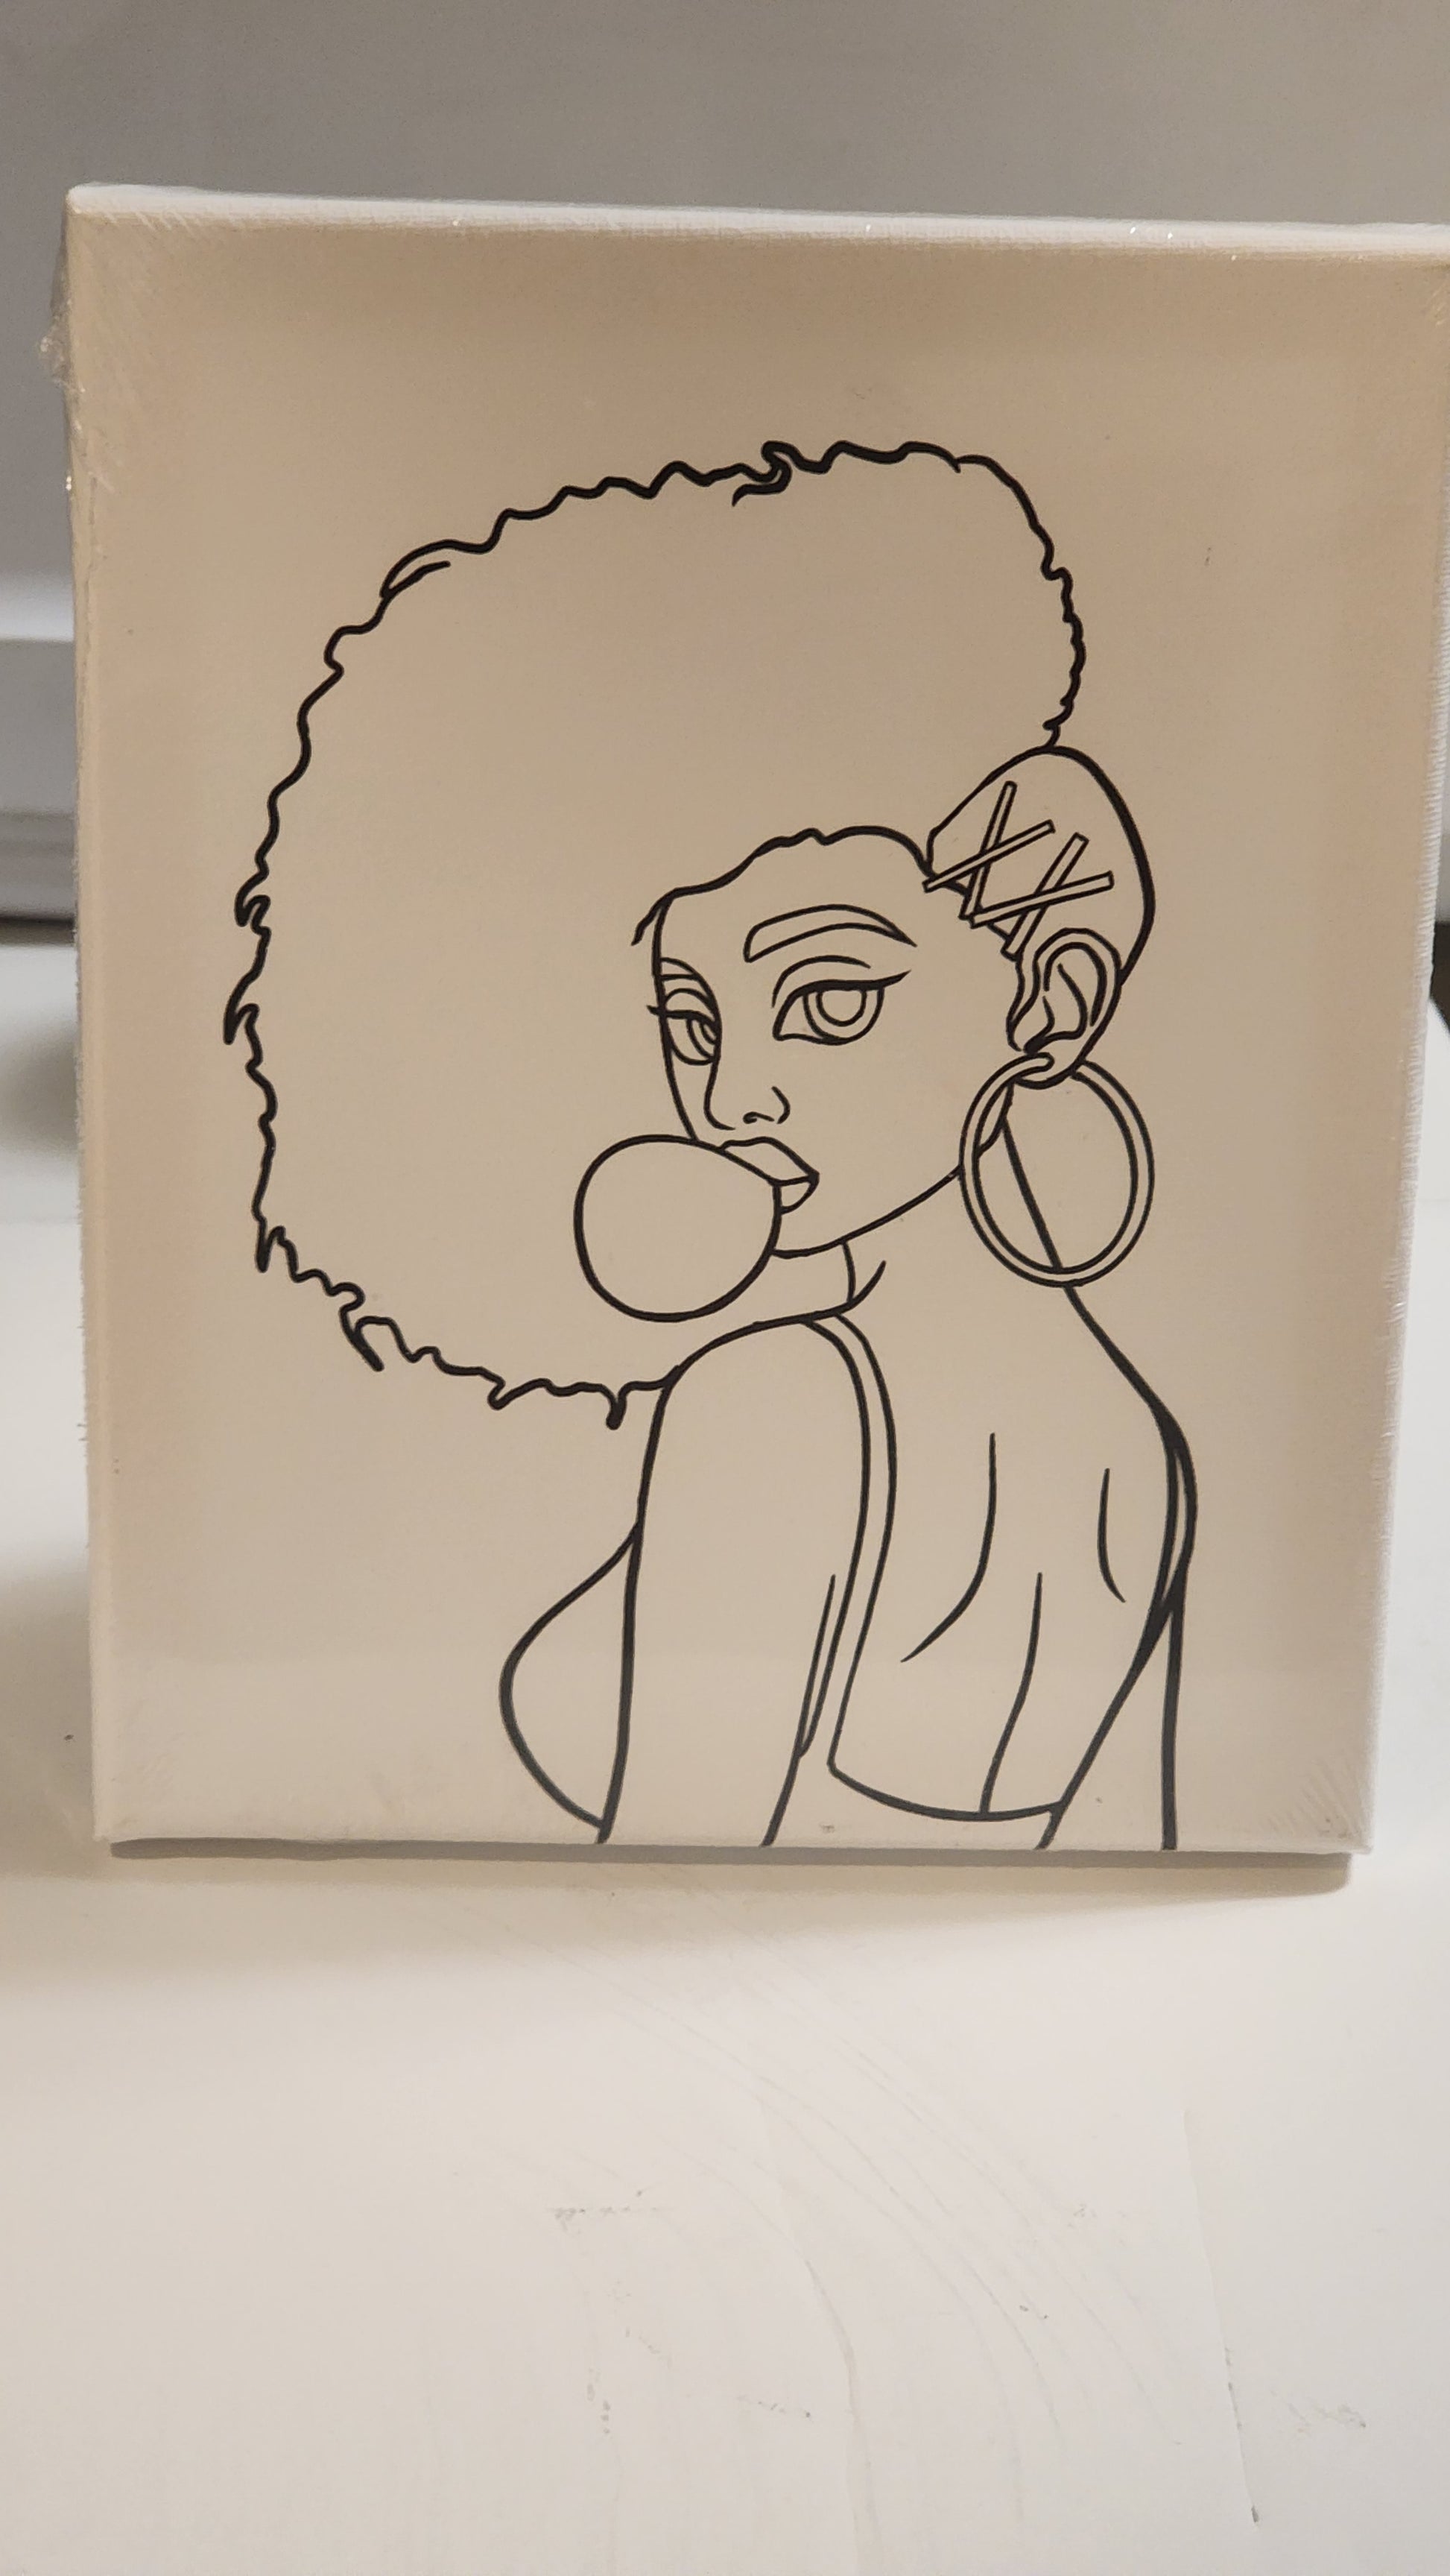  8 Pieces Pre Drawn Canvas for Painting for Adults Kids  Pre-Stretched Canvas Outline for Paint and Sip Afro Queen Theme Sip and  Piant Kit for Adult's Date Night, 8x10 Inch